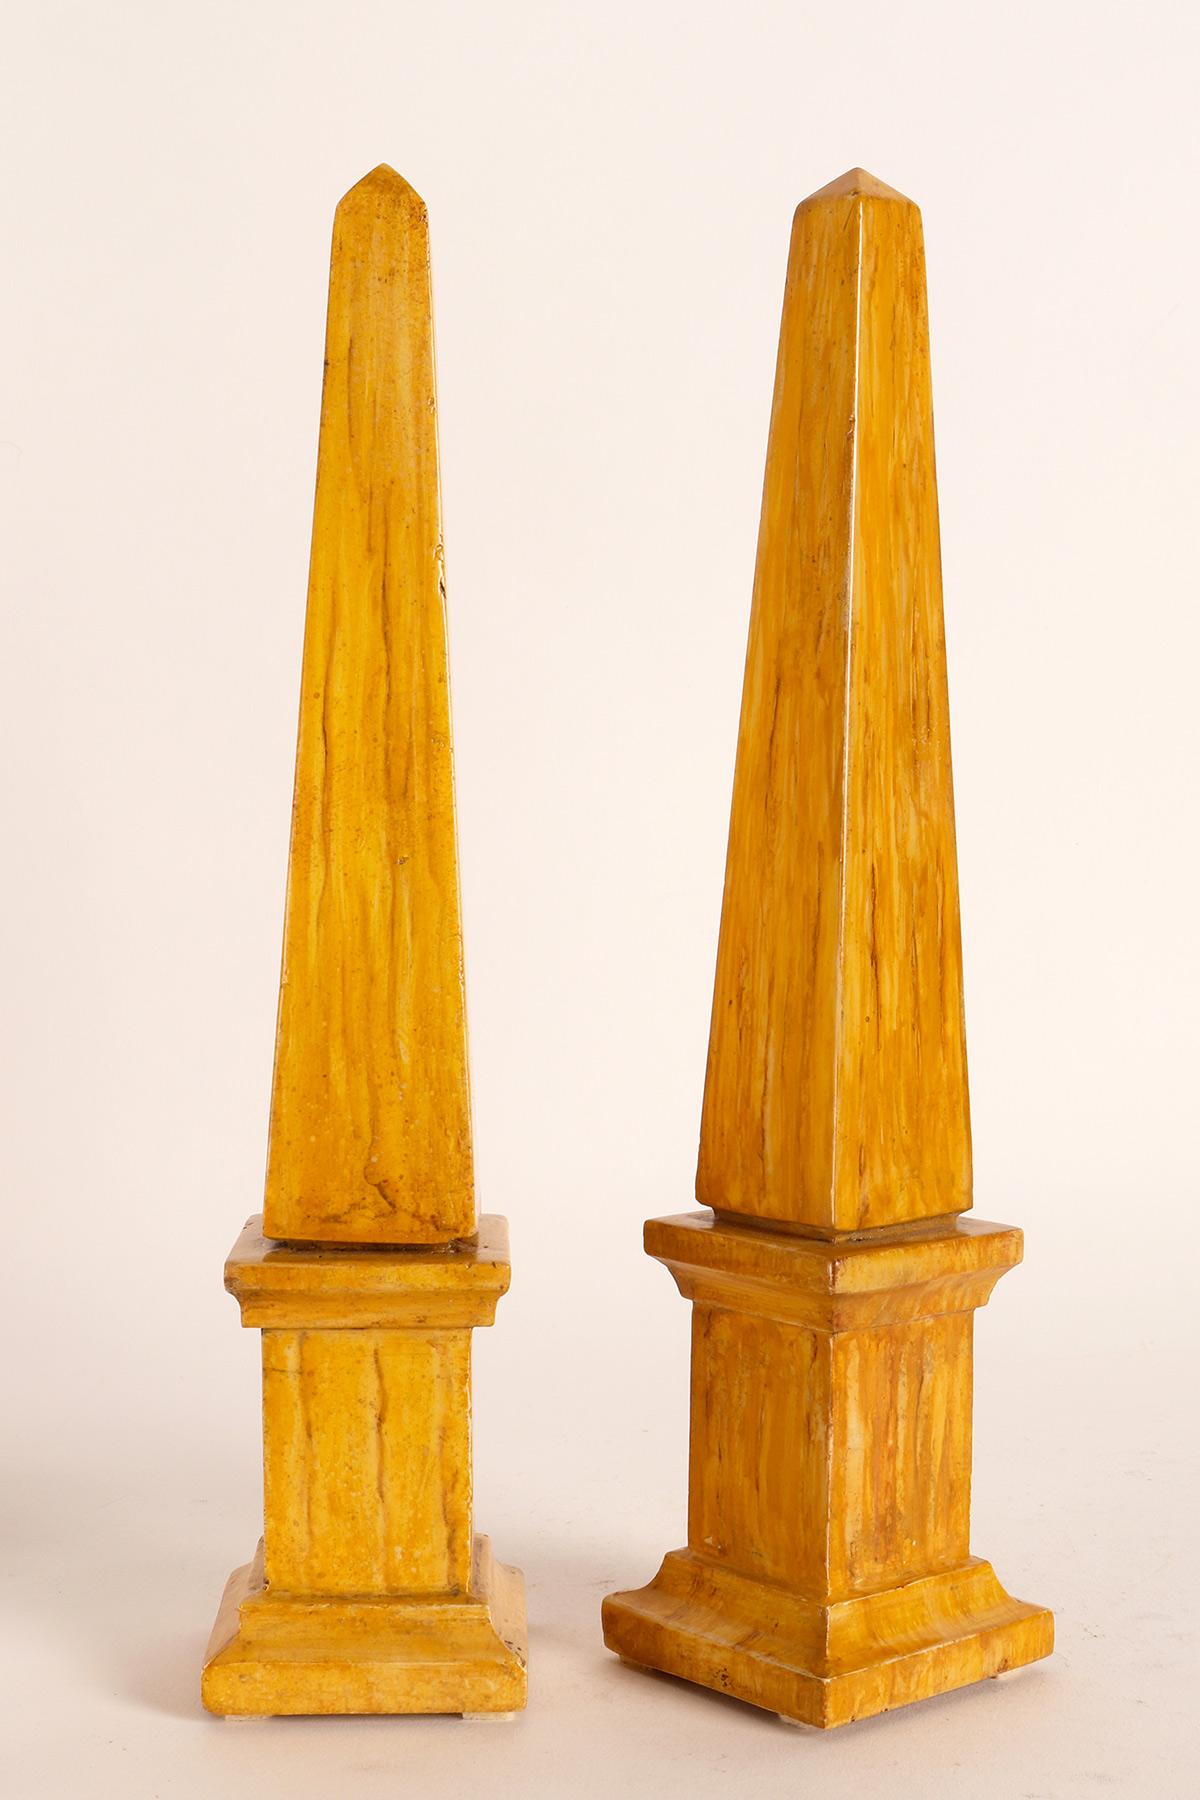 A pair of Grand Tour obelisks. Made of Travertine stone. Italy second half of the 19th century.